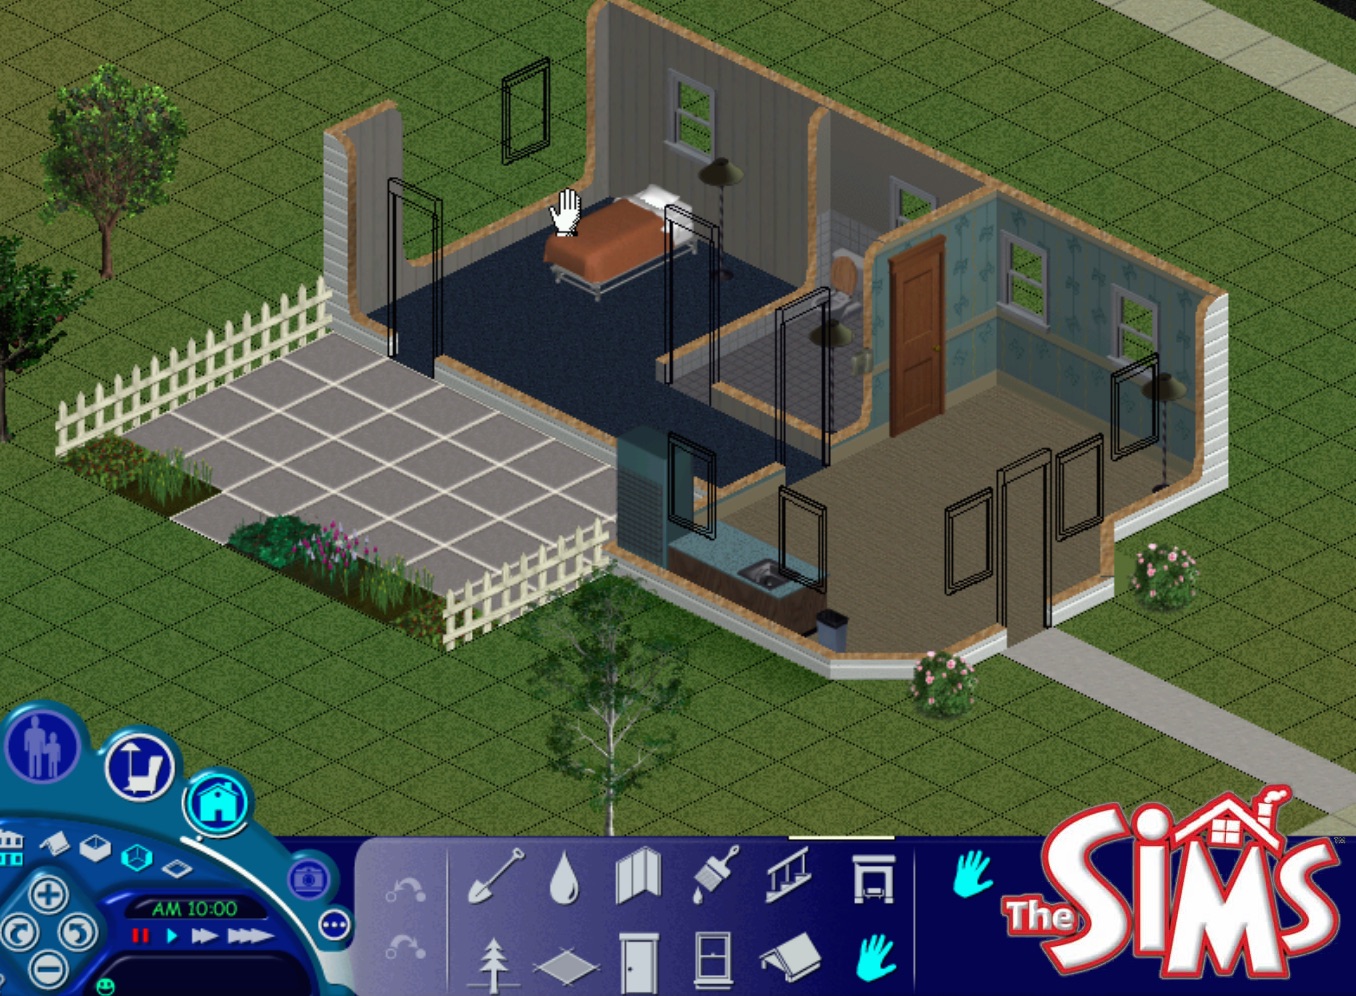 Sims 1 18. The SIMS 1. SIMS 6. Симс 1-4. Симс 1 Скриншоты.